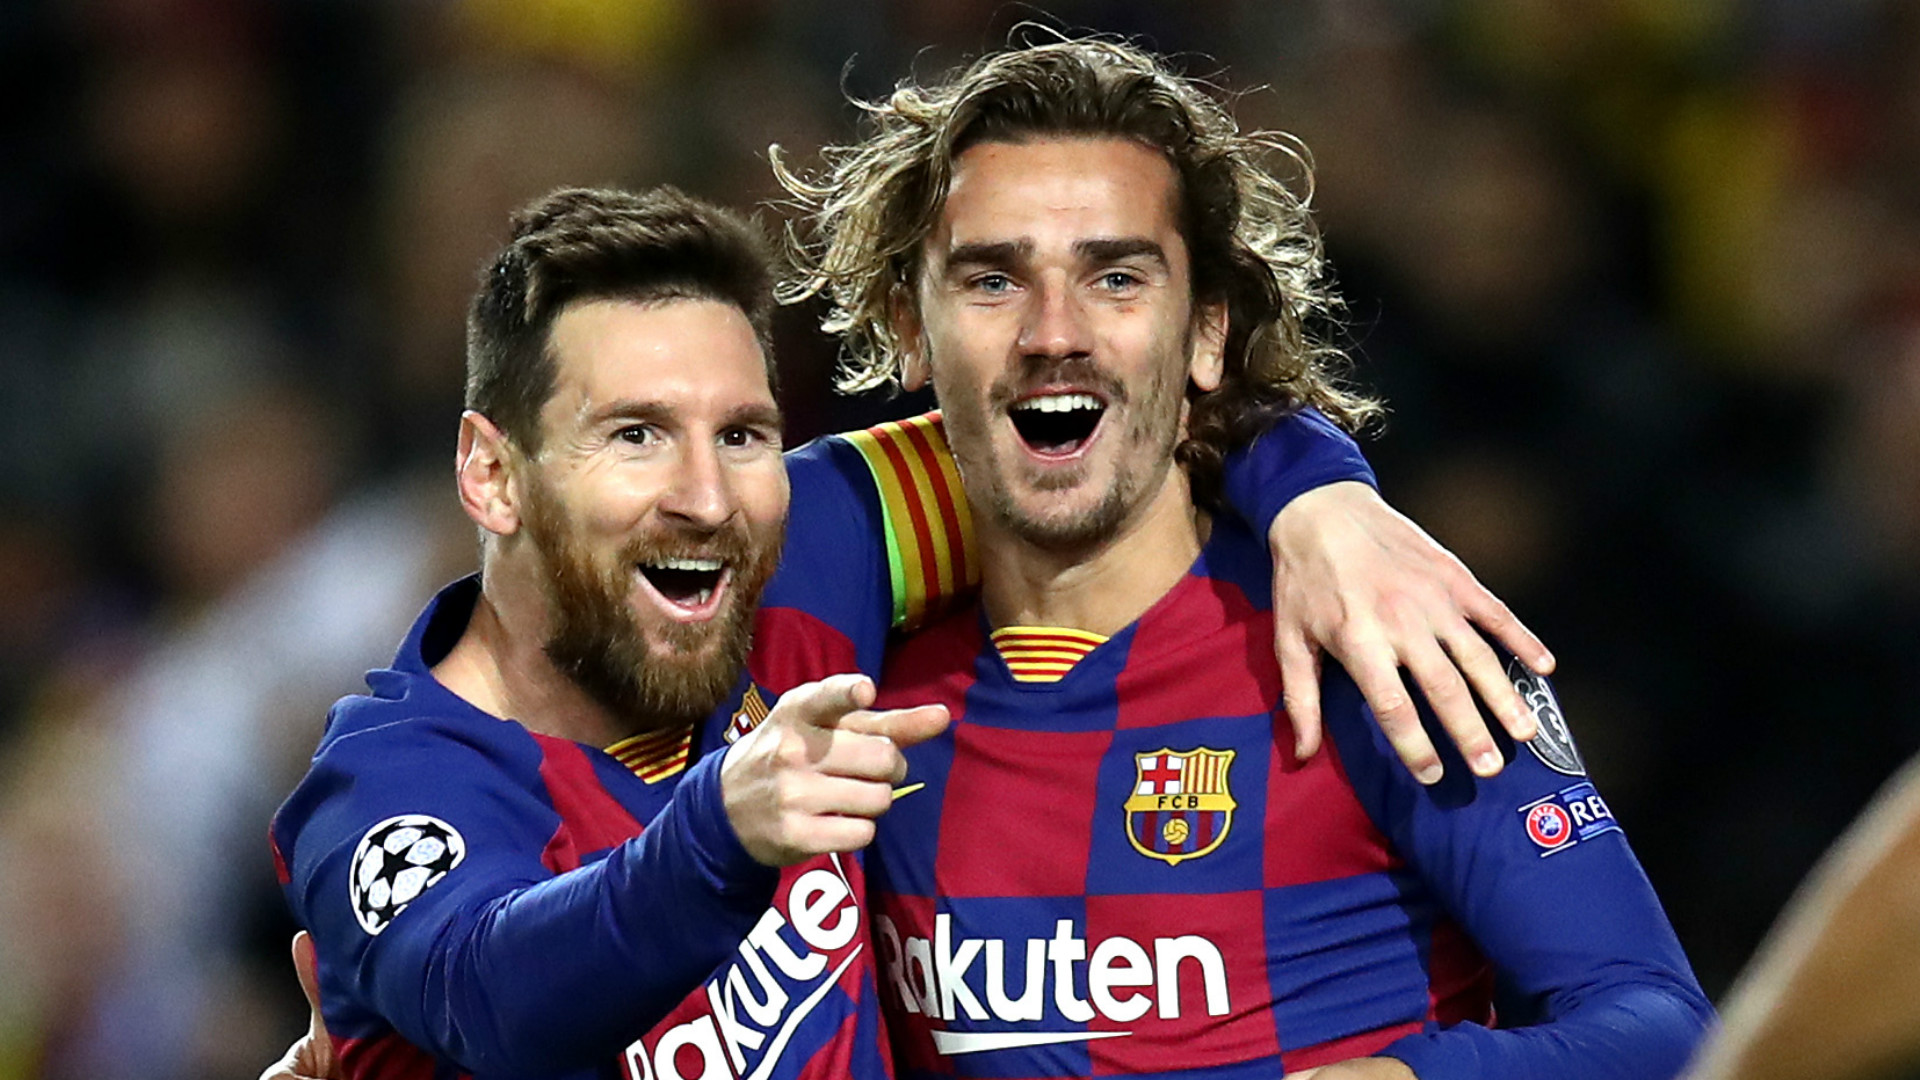 La Liga this week: Atletico host Barca this Sunday as blockbuster fixture continues